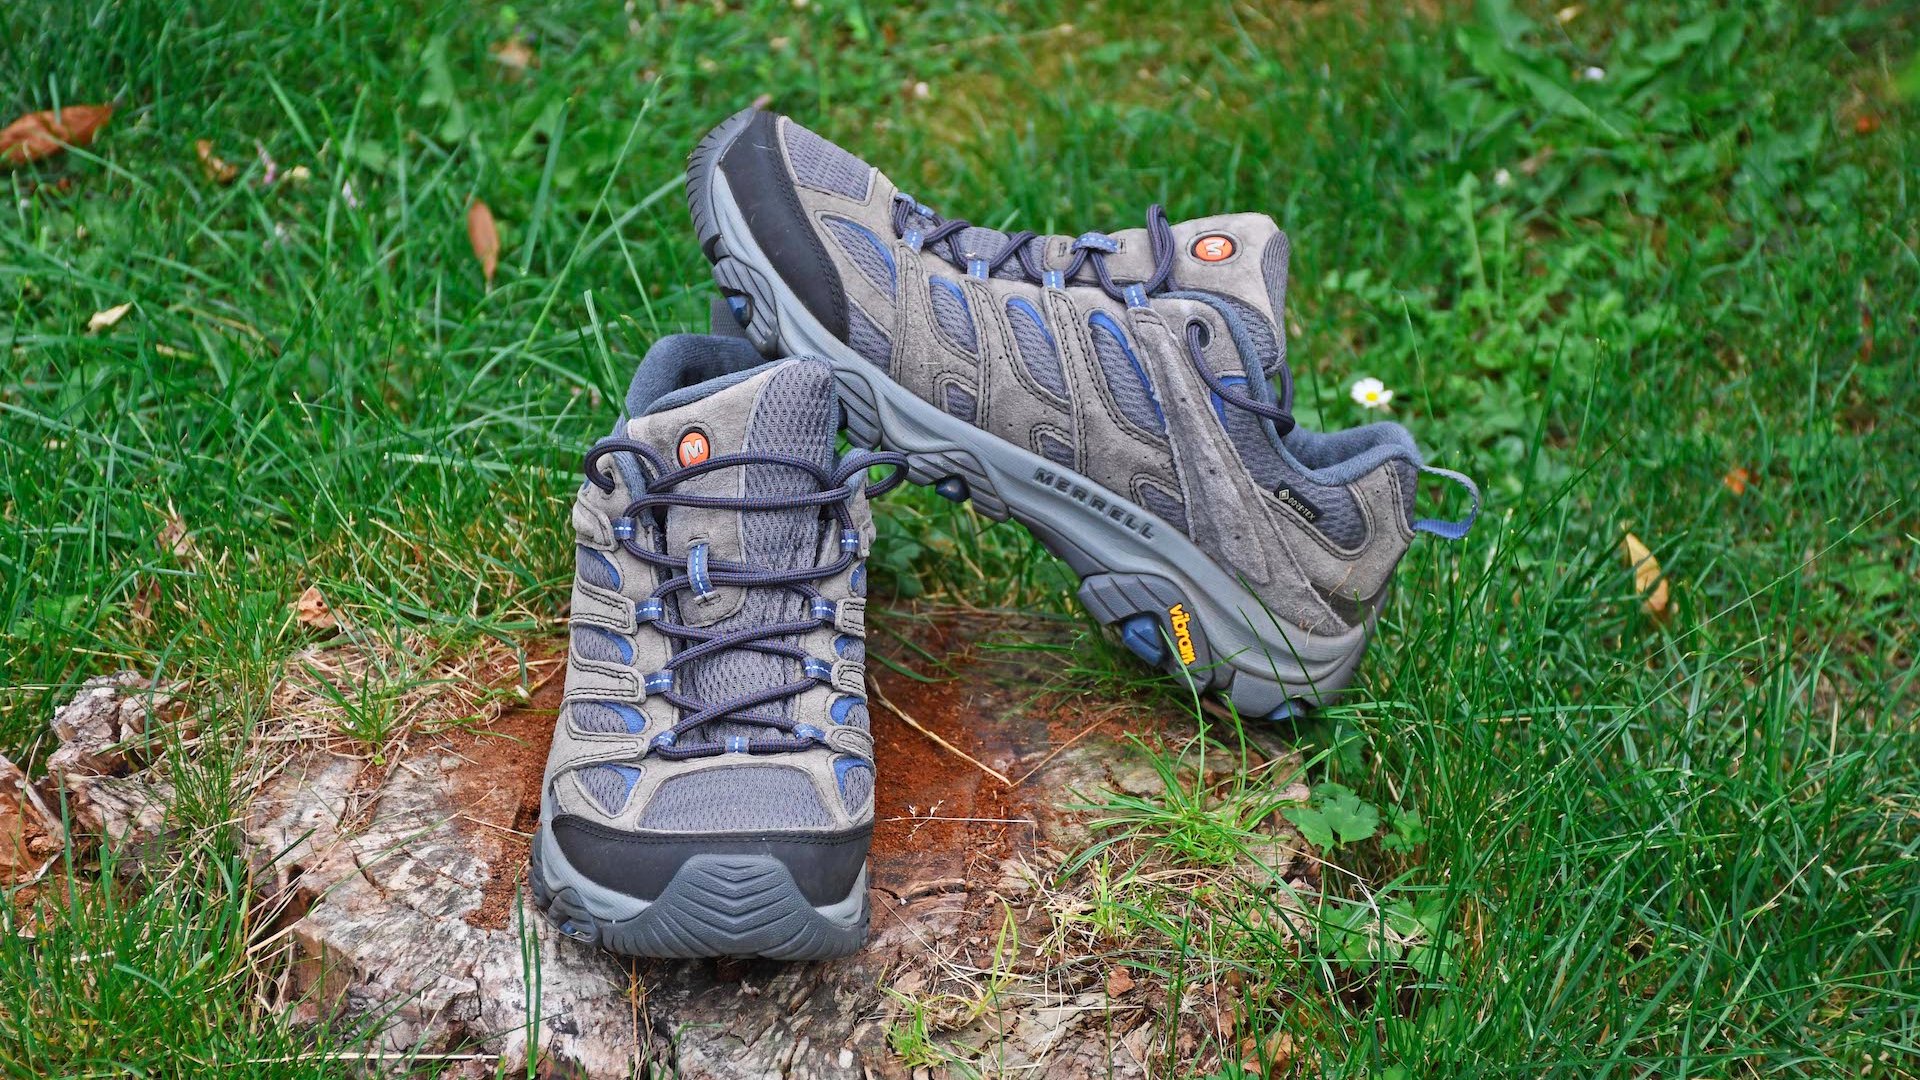 Merrell Moab 3 Gore-Tex hiking shoes review: robust comfort | Advnture